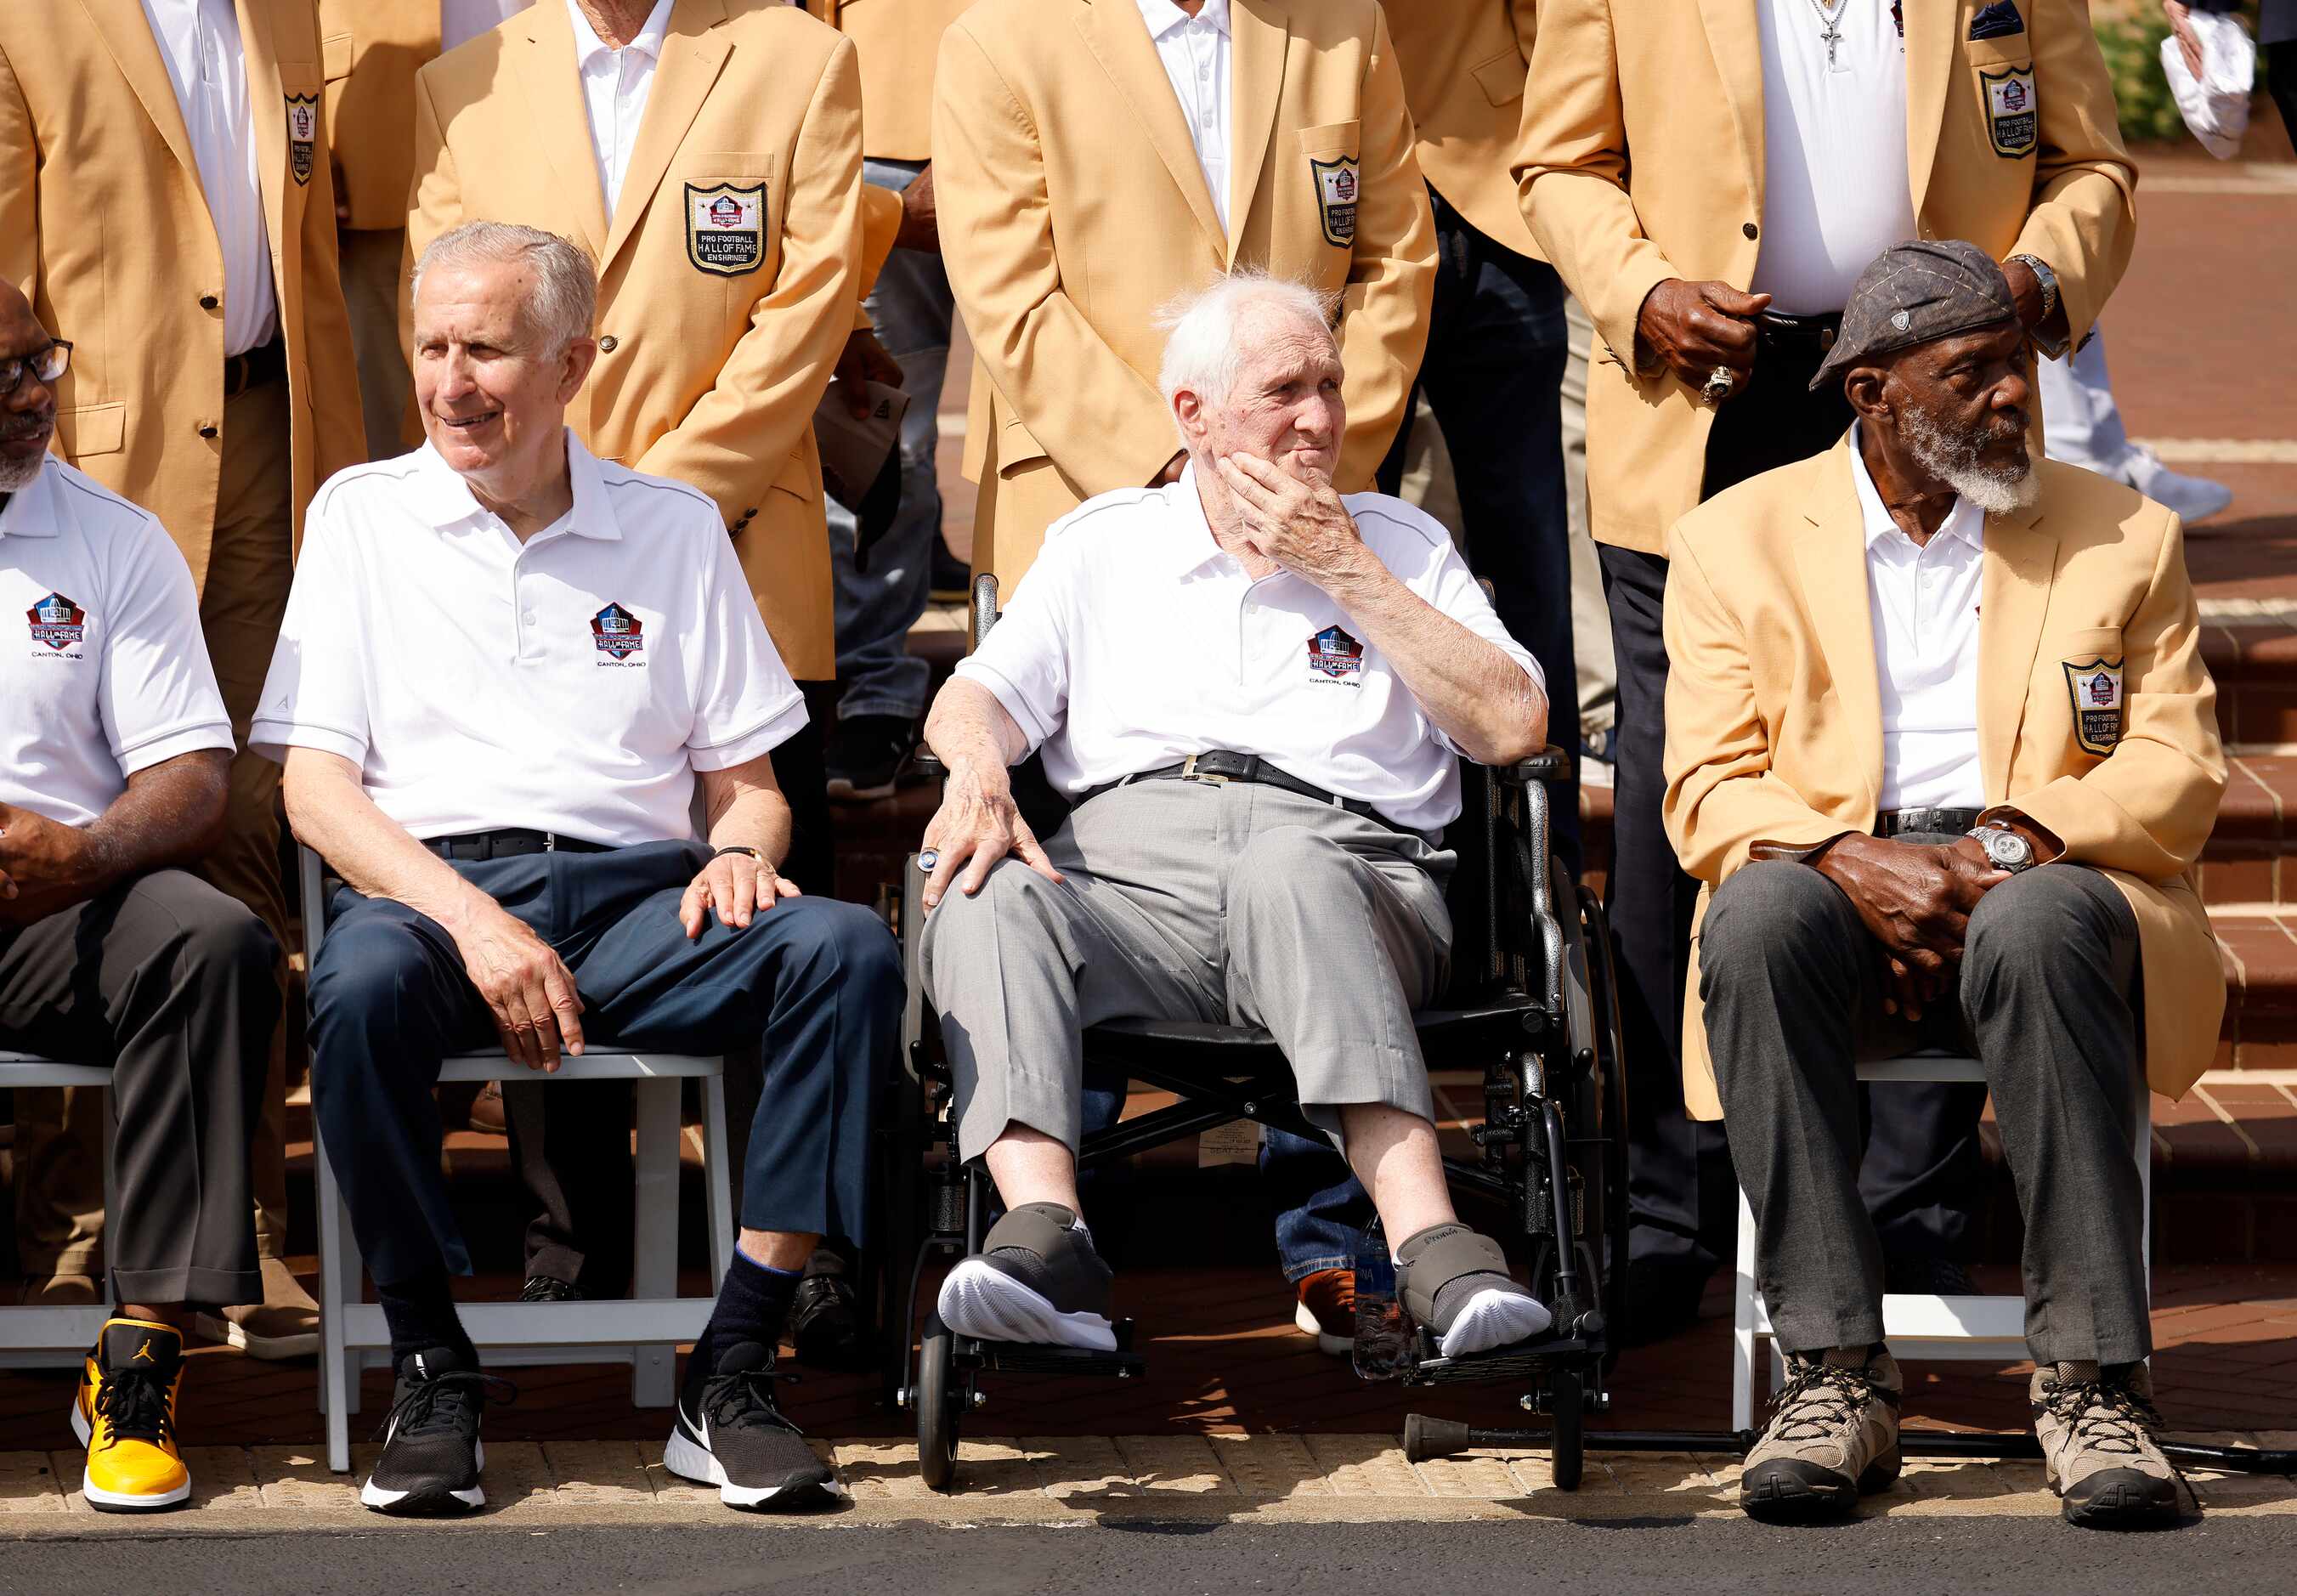 Dallas Cowboys Pro Football Hall of Fame member Gil Brandt (second from right) waits with...